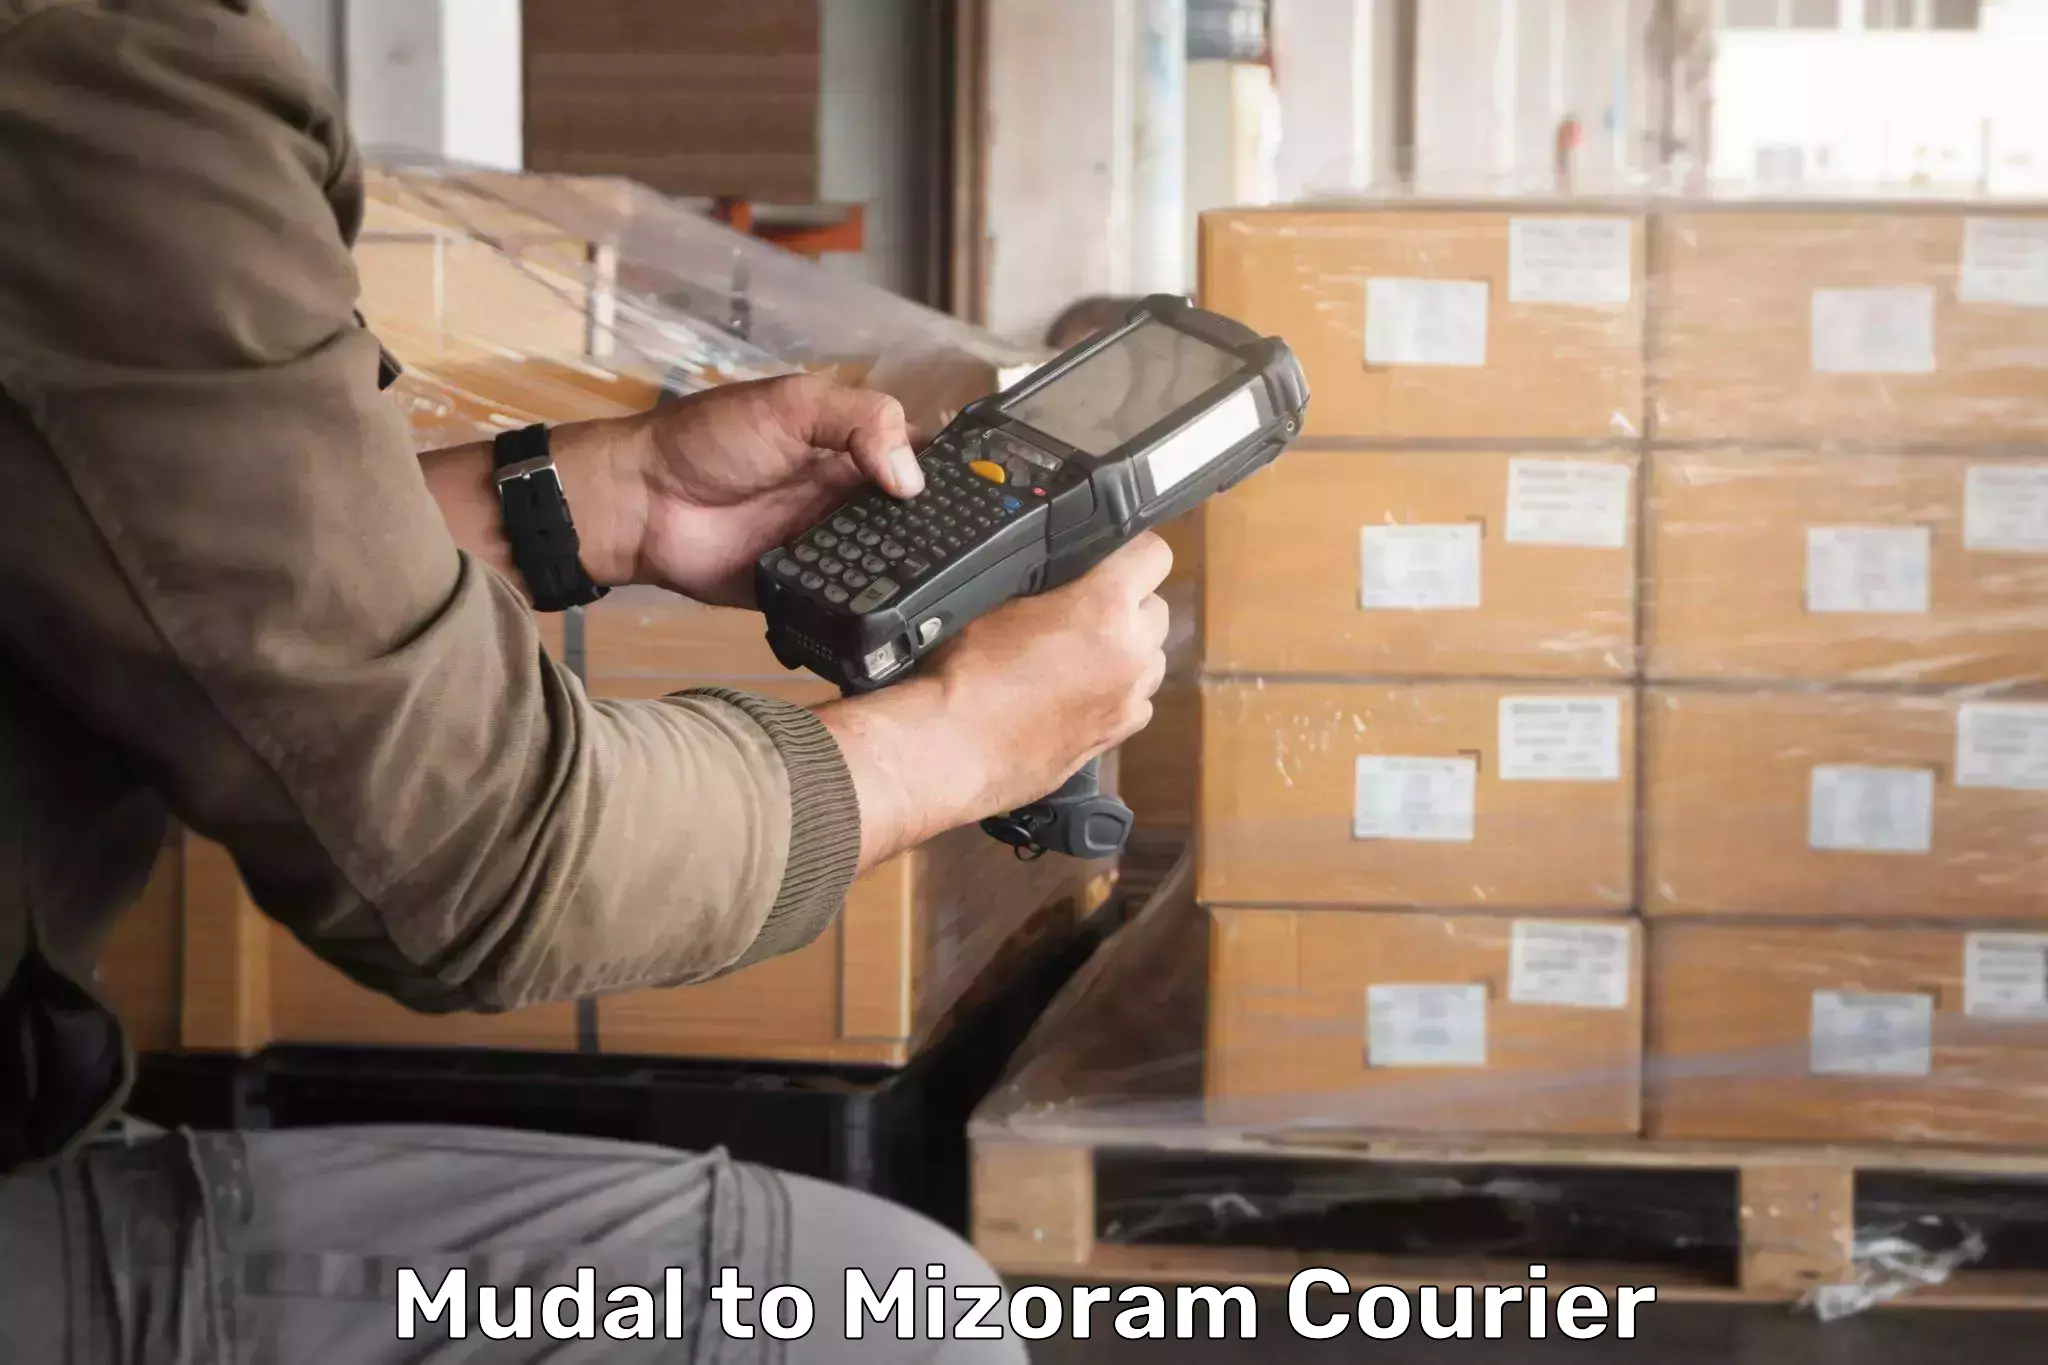 On-call courier service Mudal to Saiha